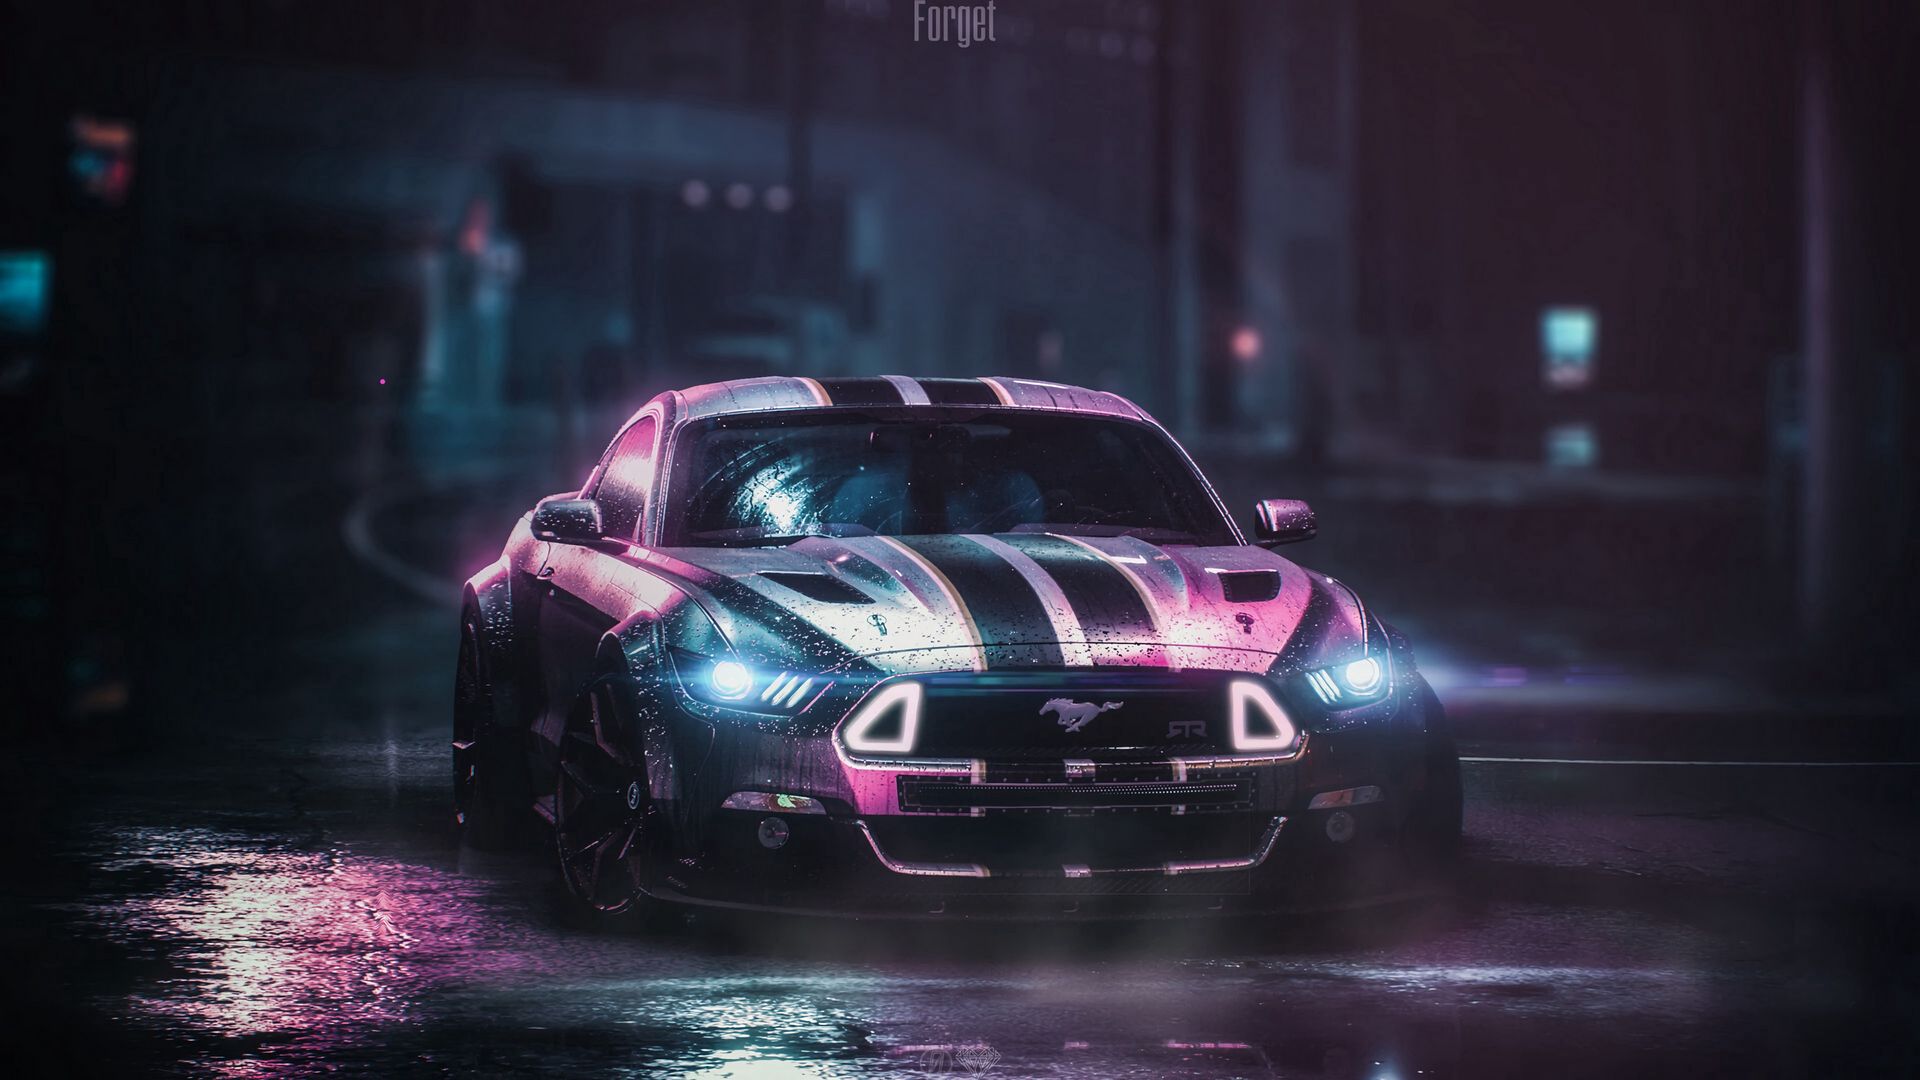 Download wallpaper 1920x1080 ford mustang gtr, ford, car, neon, night